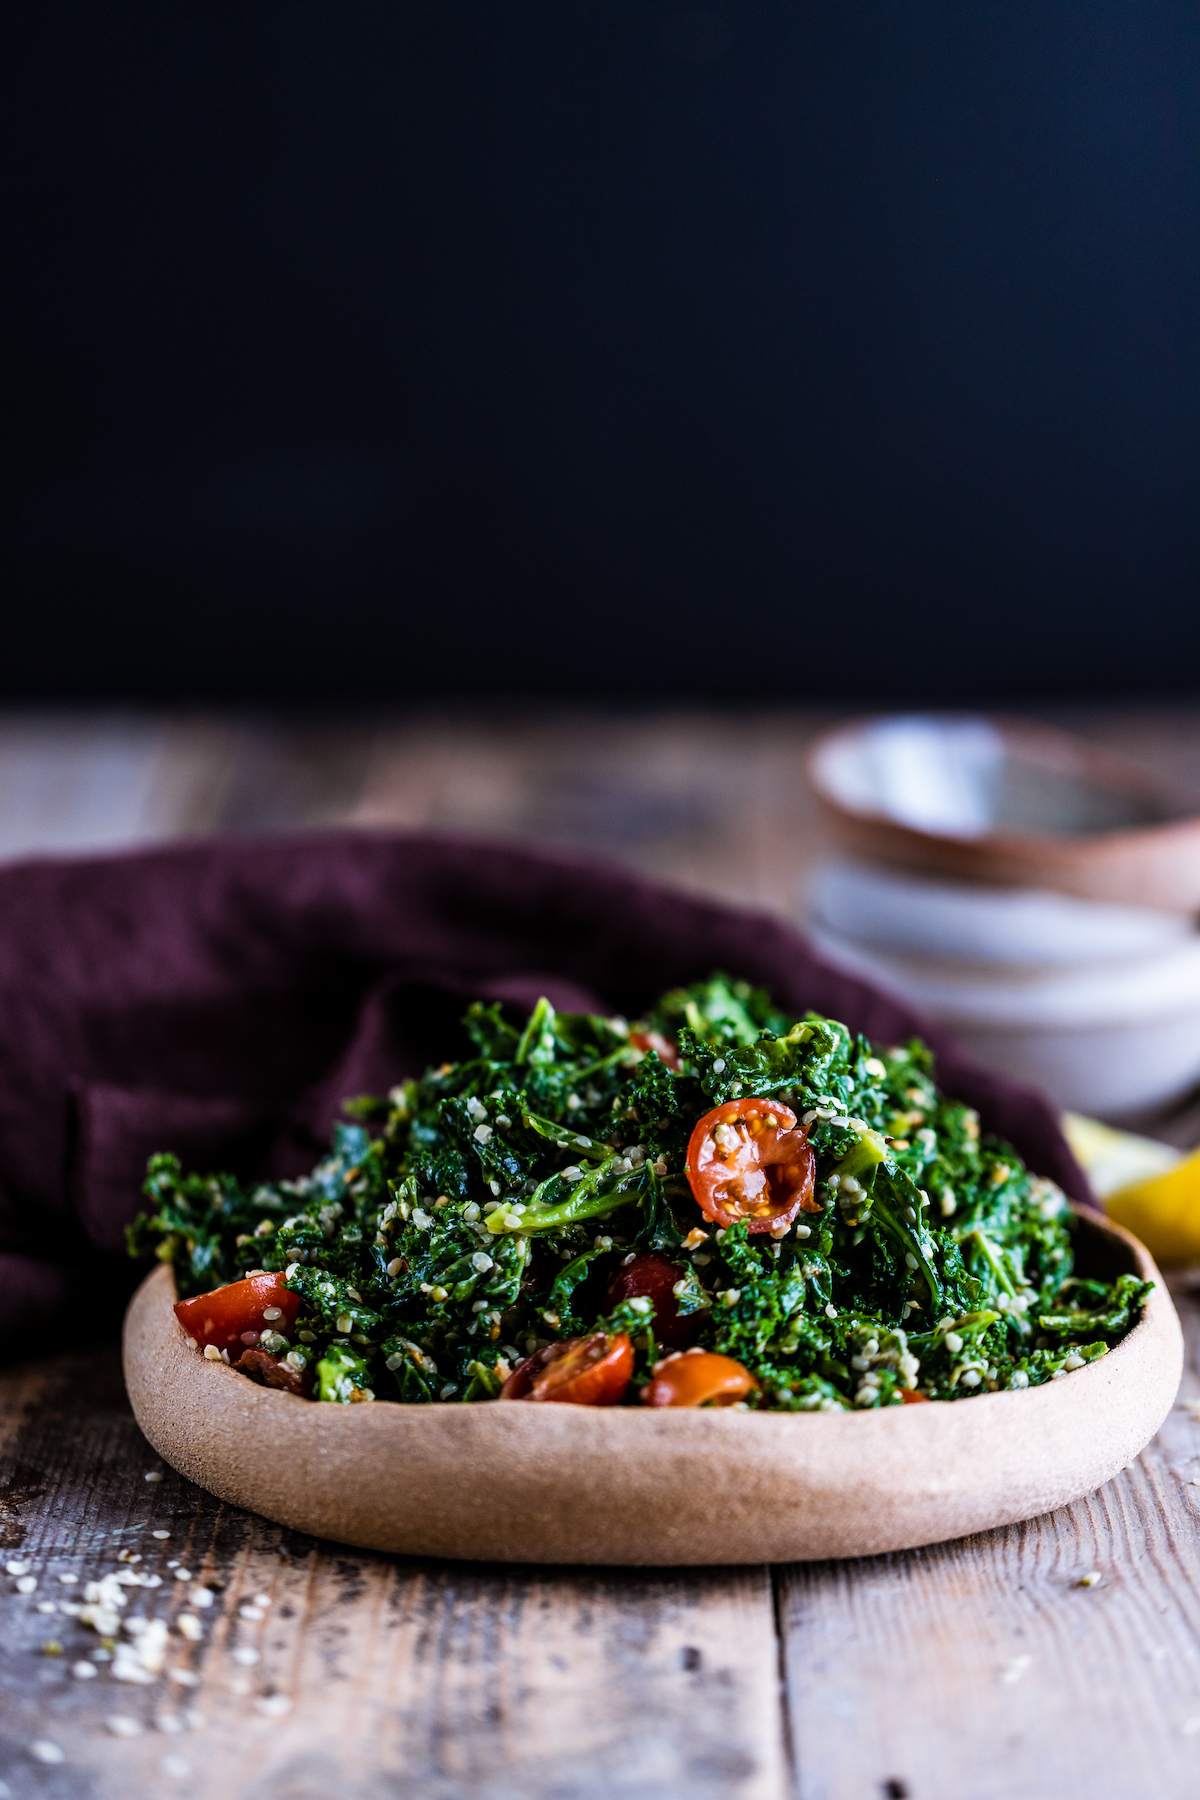 Kale avocado salad in a brown bowl on a wooden surface